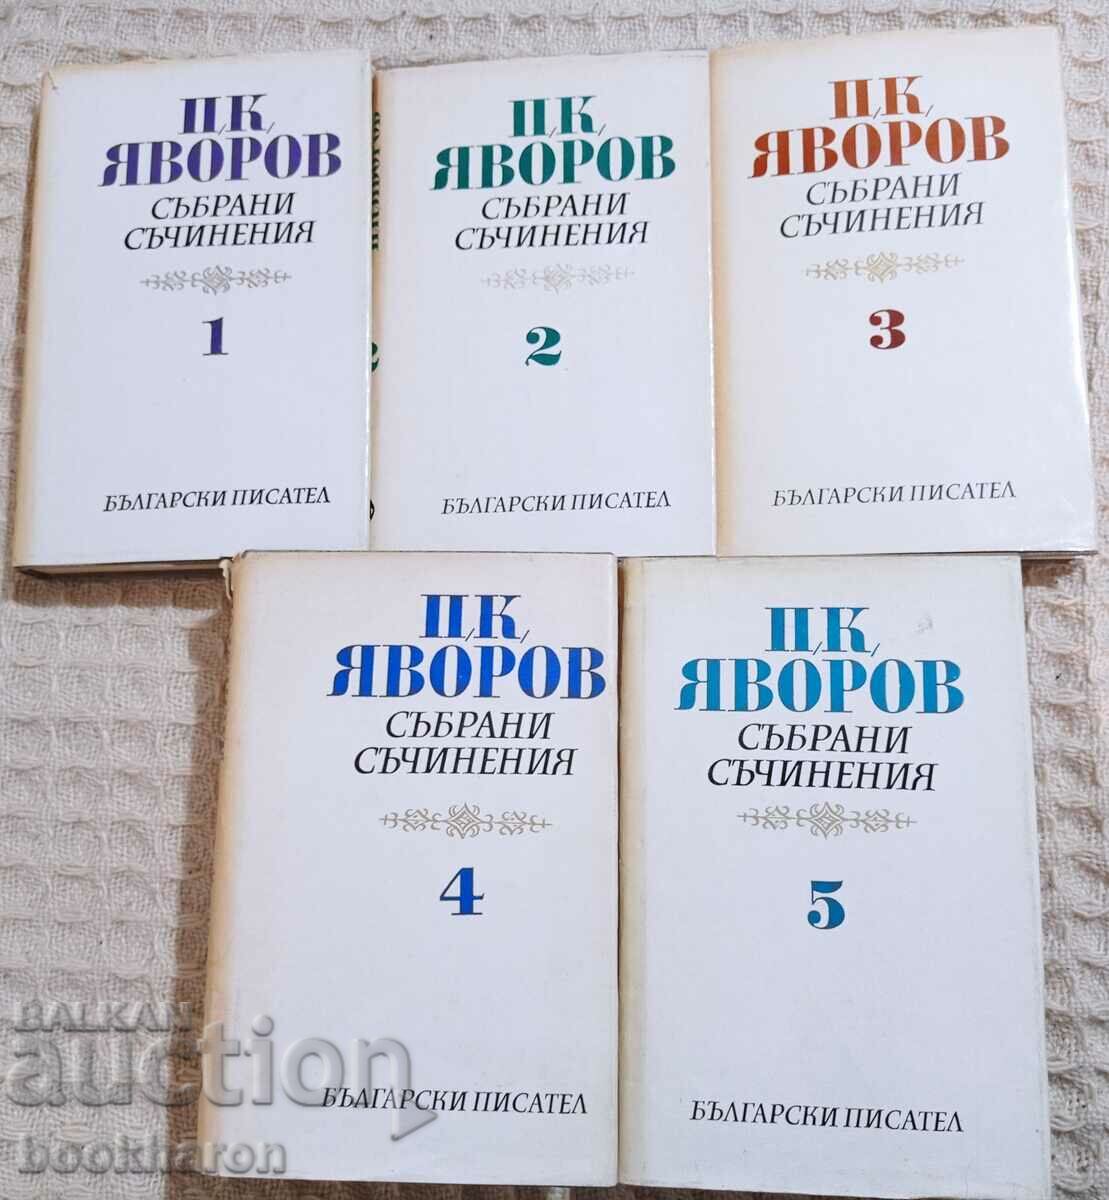 PK Yavorov: Collected works 1-5